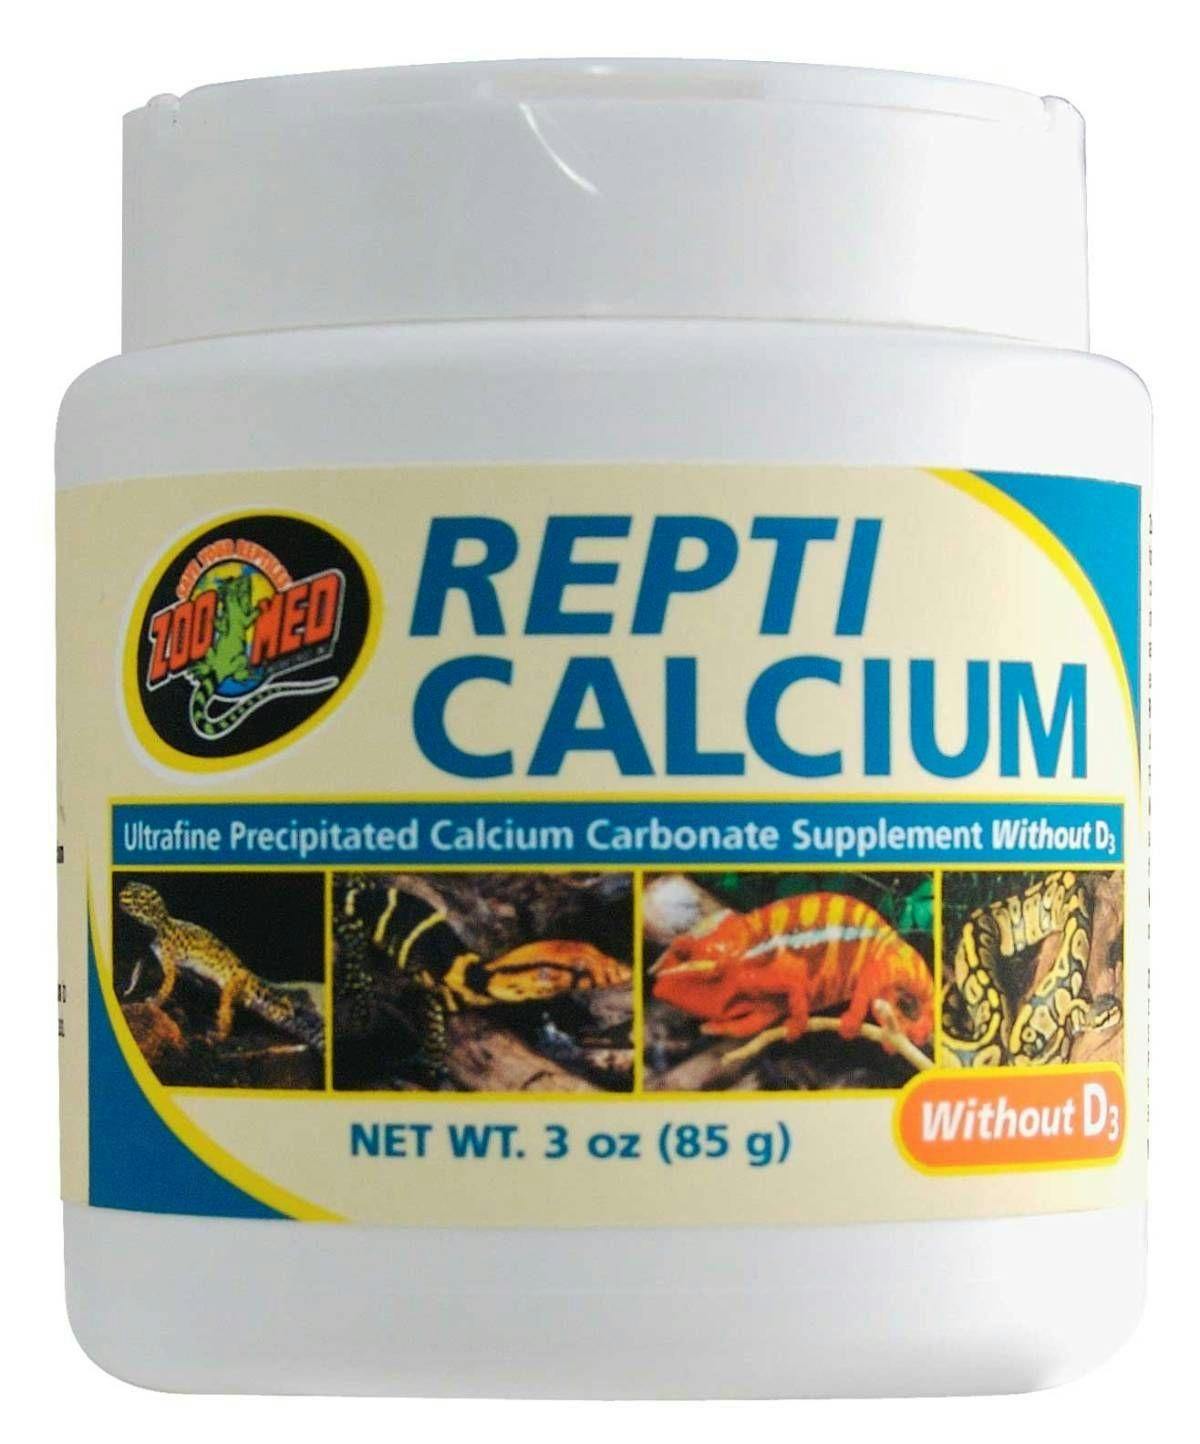 Image 1 for Zoo Med Repti Calcium without D3 (3 oz) by Josh's Frogs